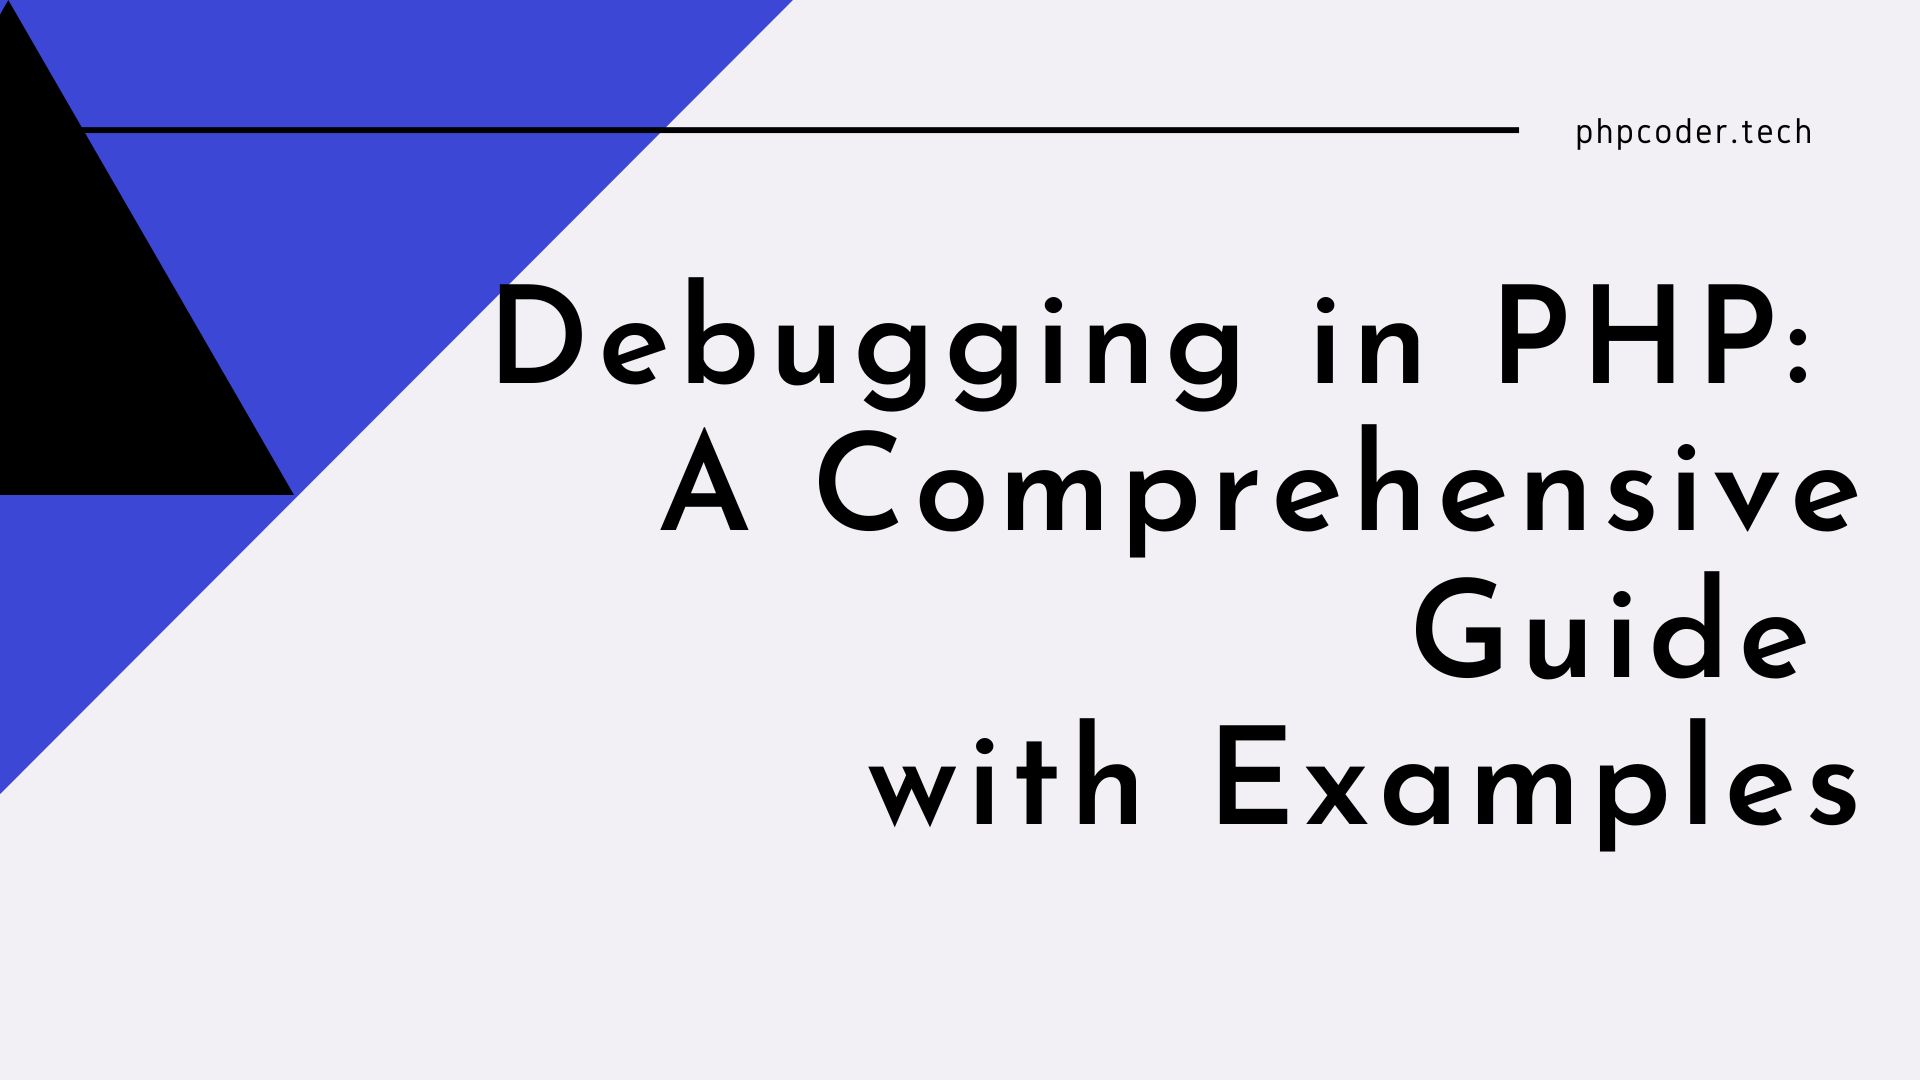 Debugging in PHP: A Comprehensive Guide with Examples